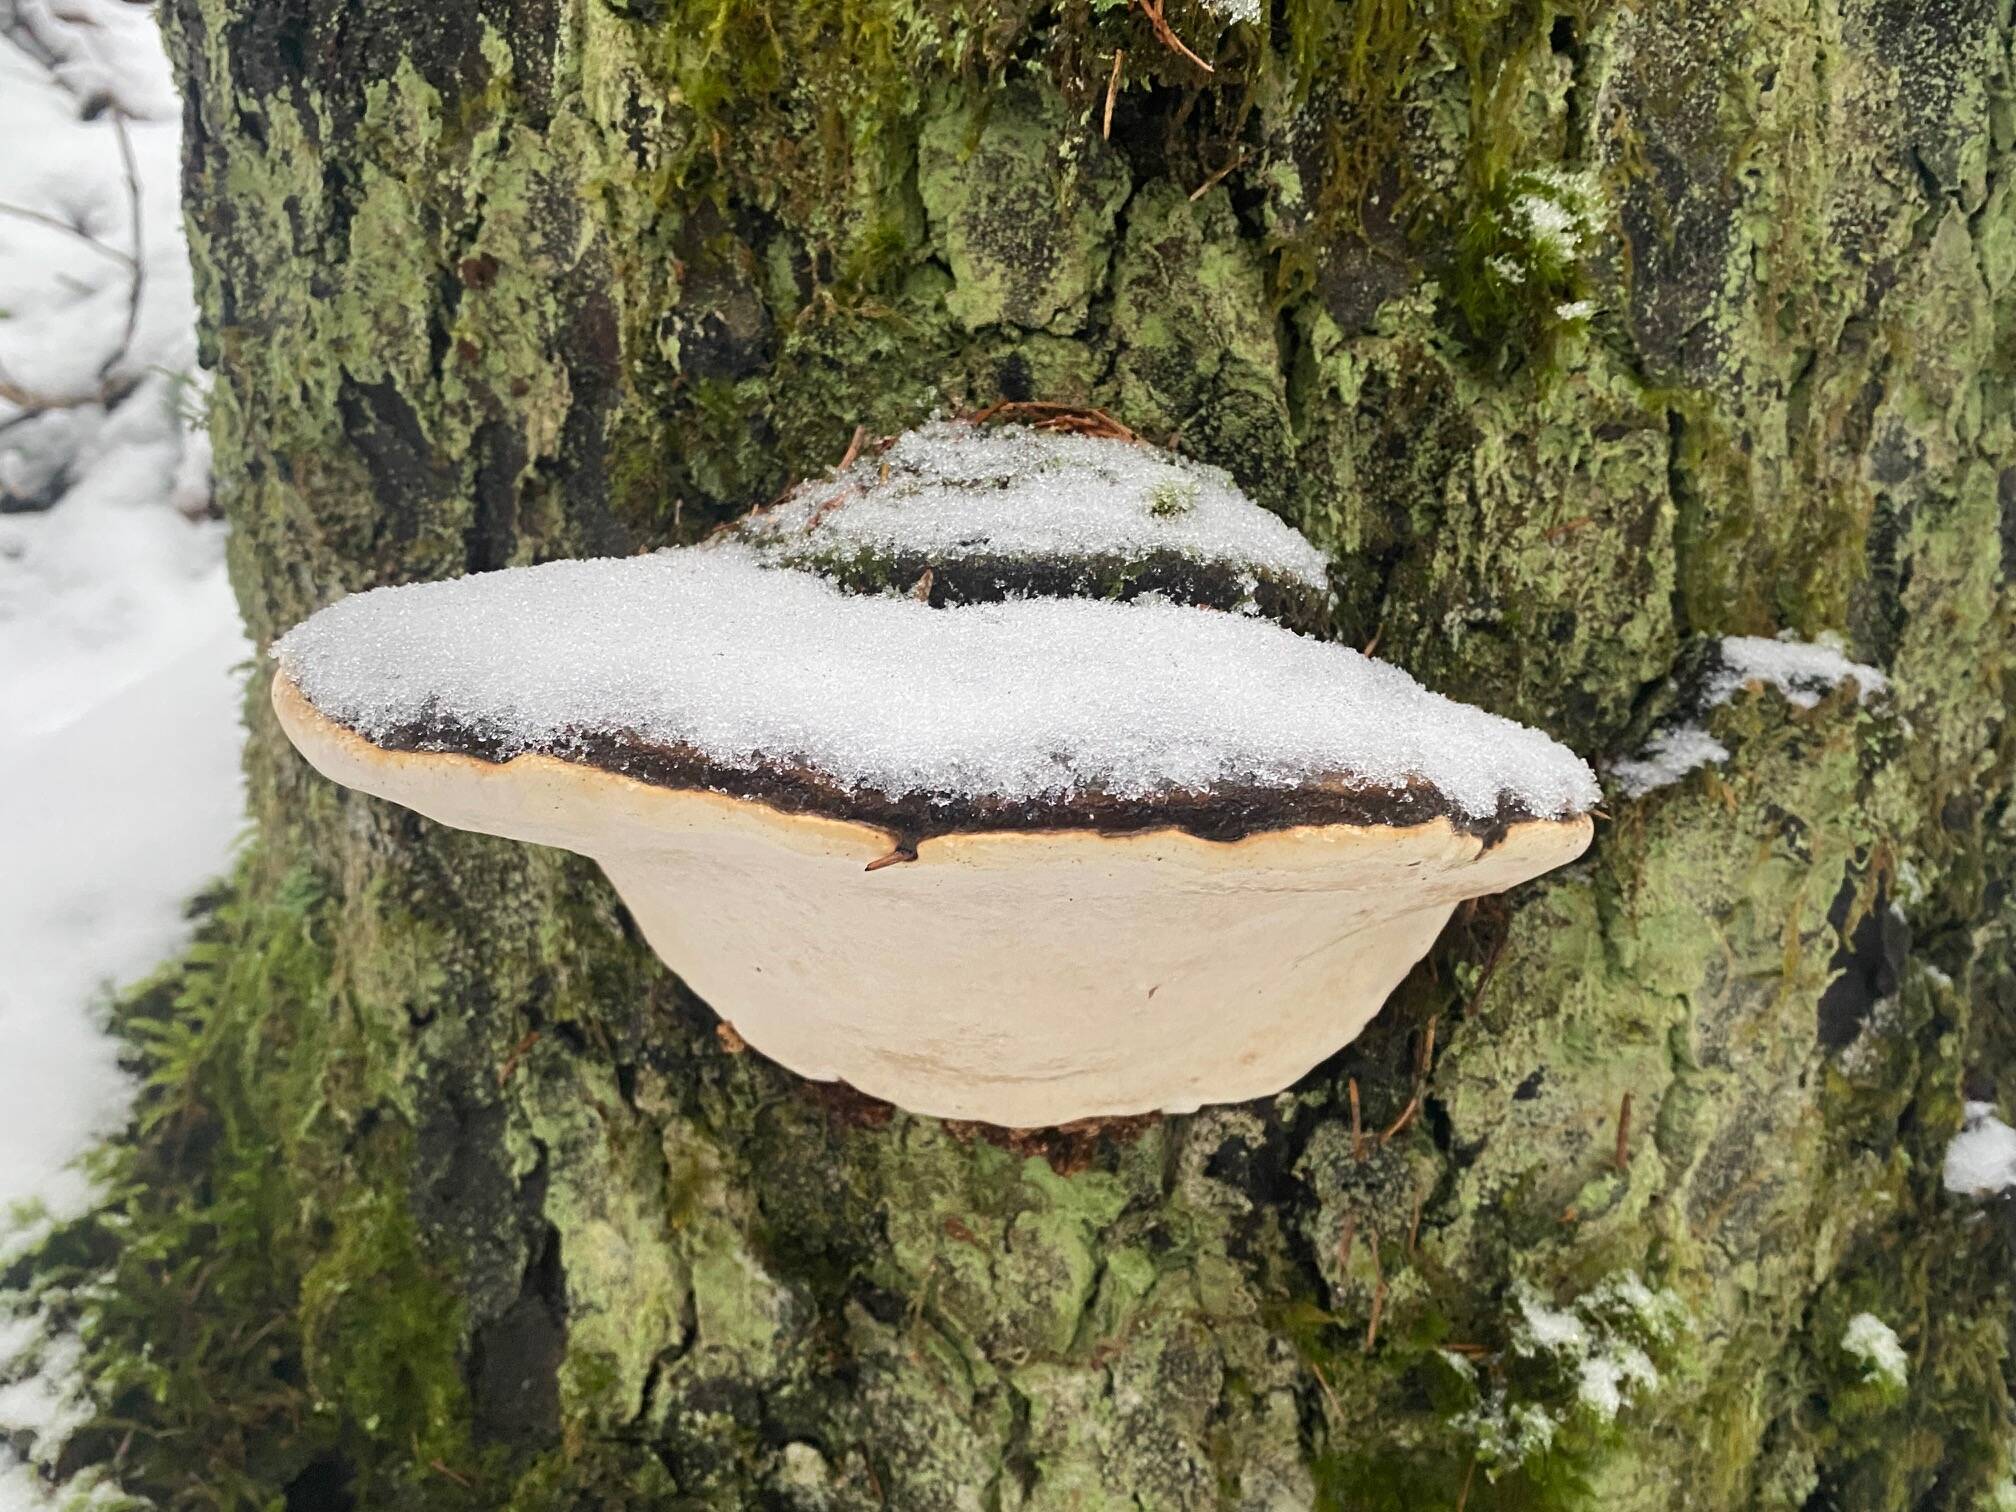 Snow-capped artist’s conk seen on a decaying tree trump near the West Glacier Trail on Dec. 16. (Photo by Denise Carroll)